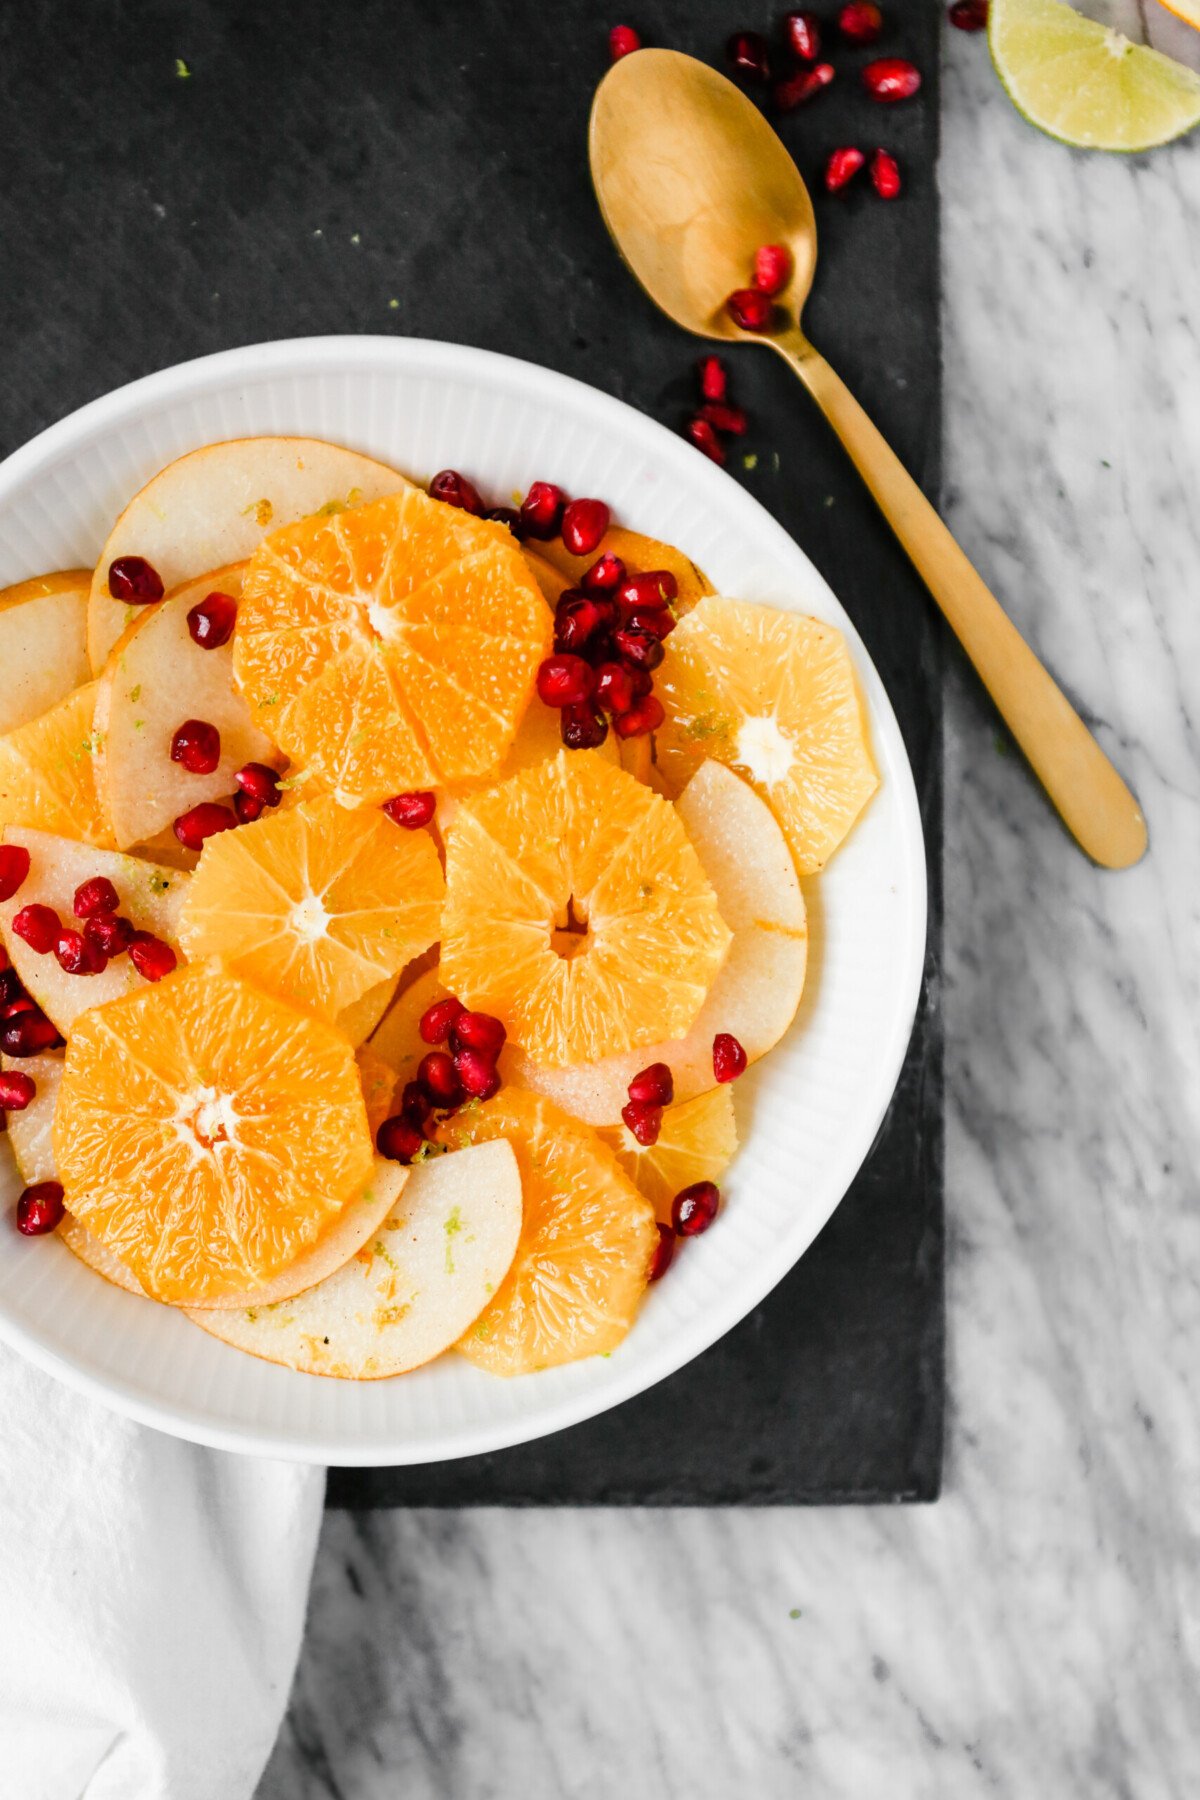 Photograph of winter citrus fruit salad with pomegranate seeds set in a white bowl on a marble table.